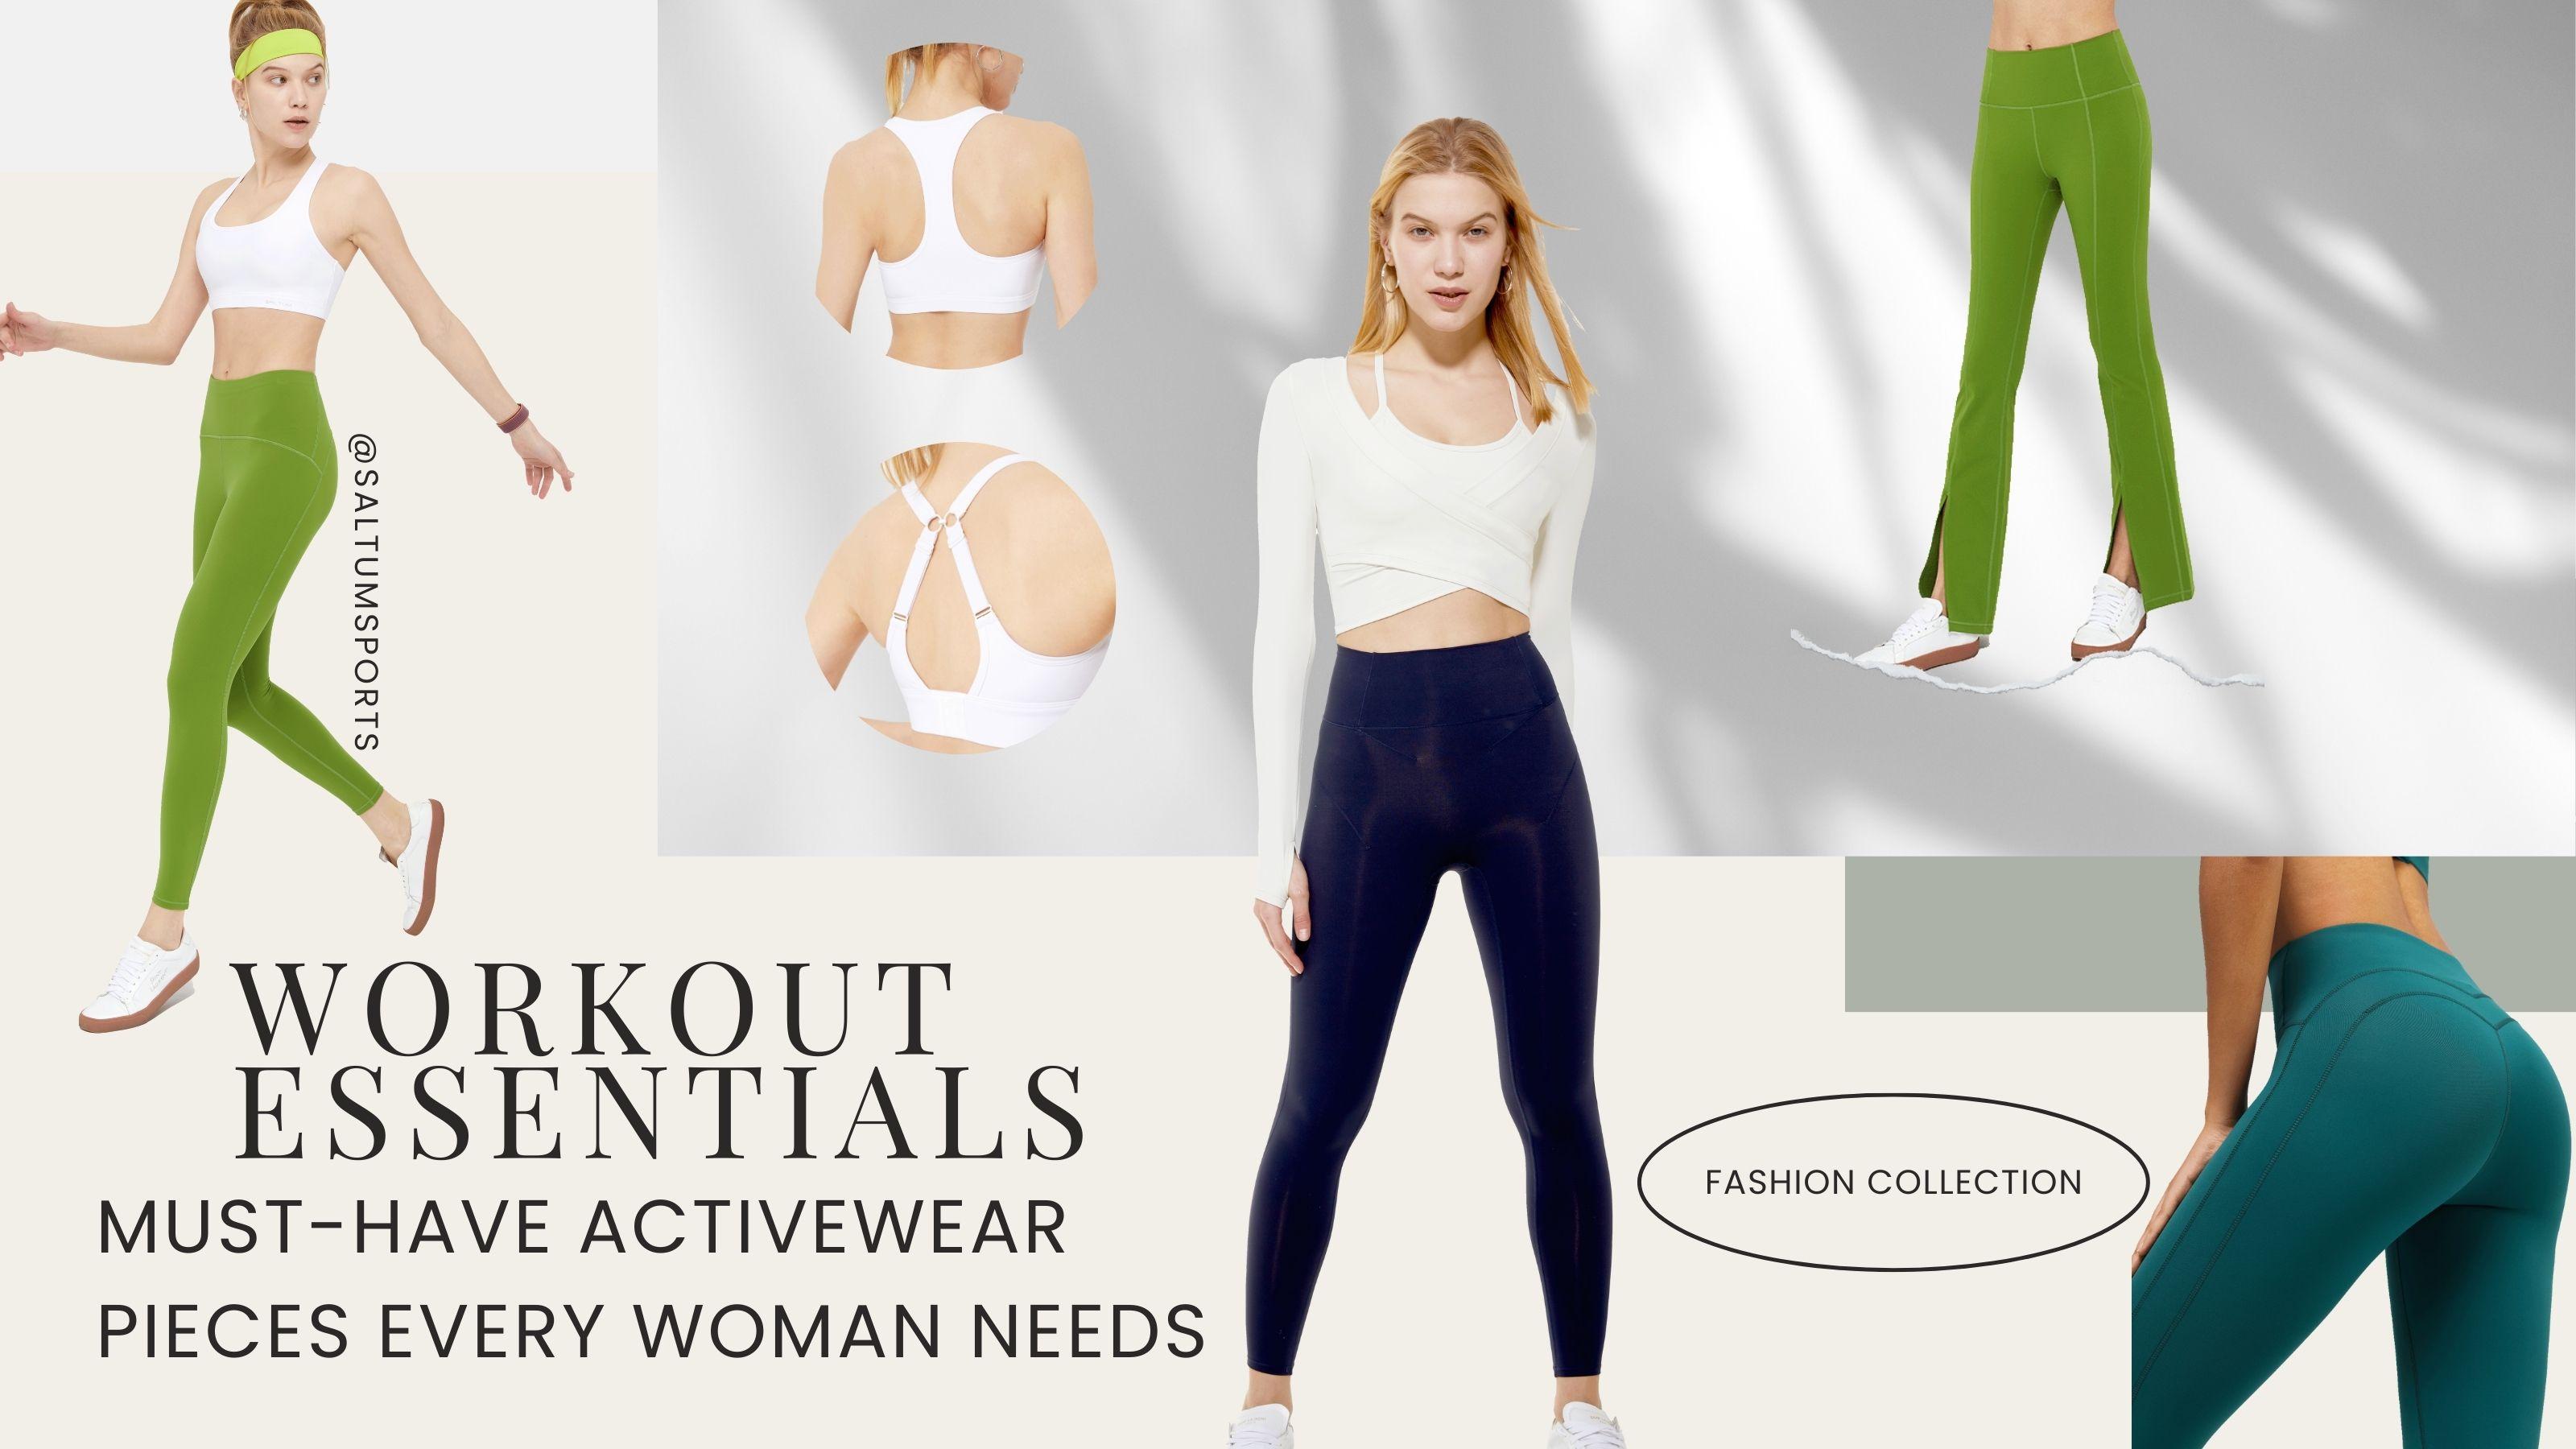 Workout Essentials: Must-Have Activewear Pieces Every Woman Needs